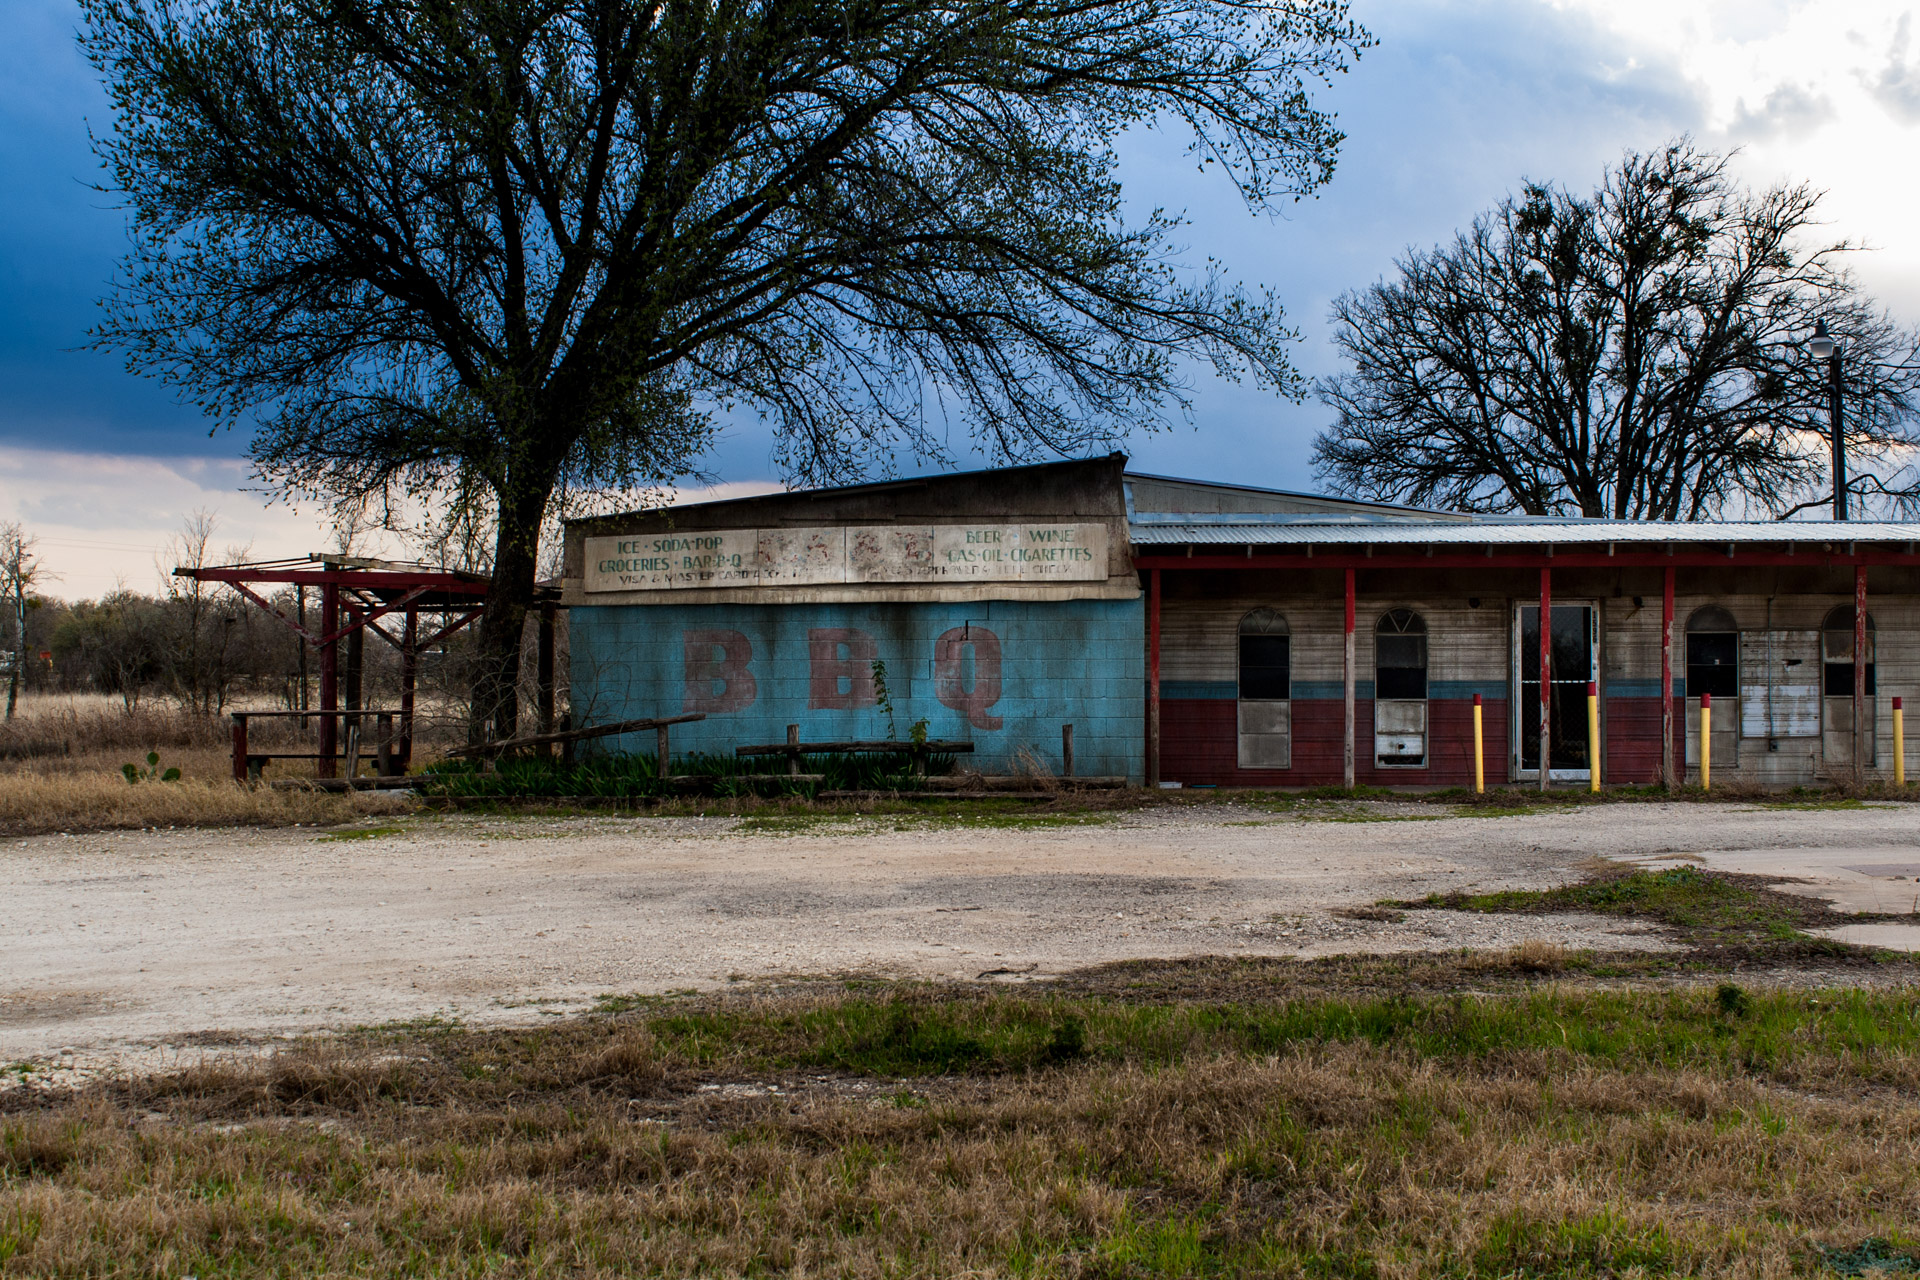 Elgin, Texas - BBQ And Gas Station (front left)